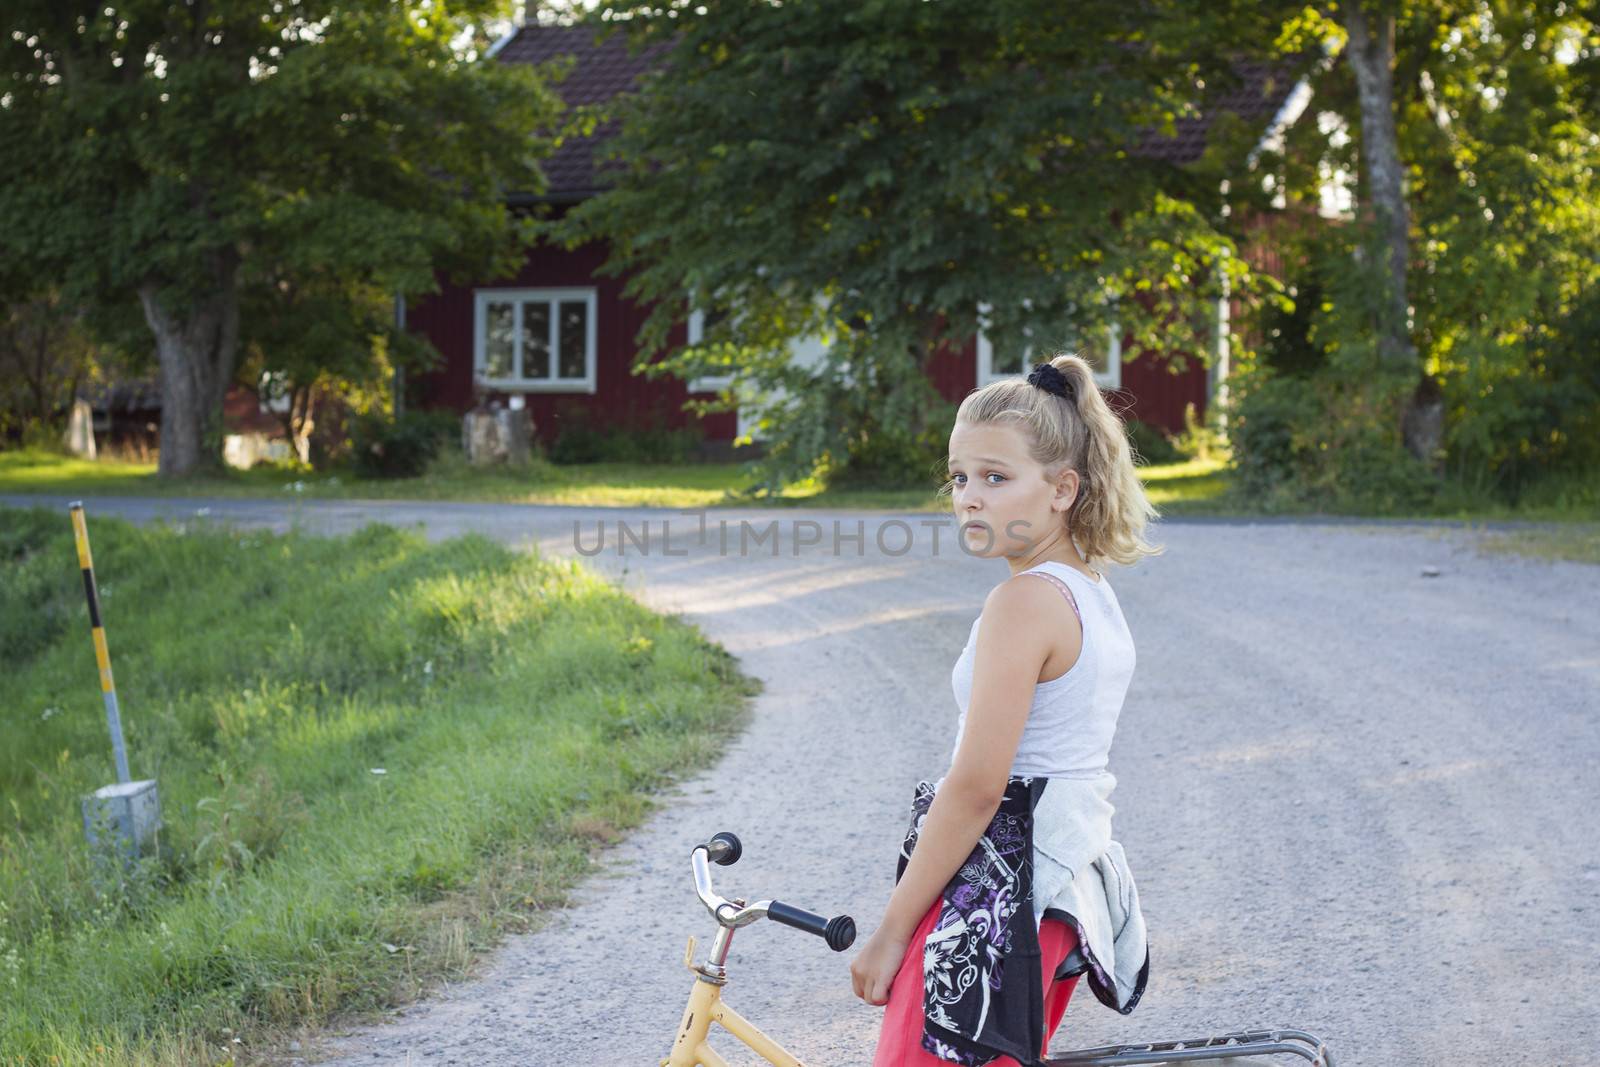 An alone girl looking upset on a bicycle in a rural area in Sweden